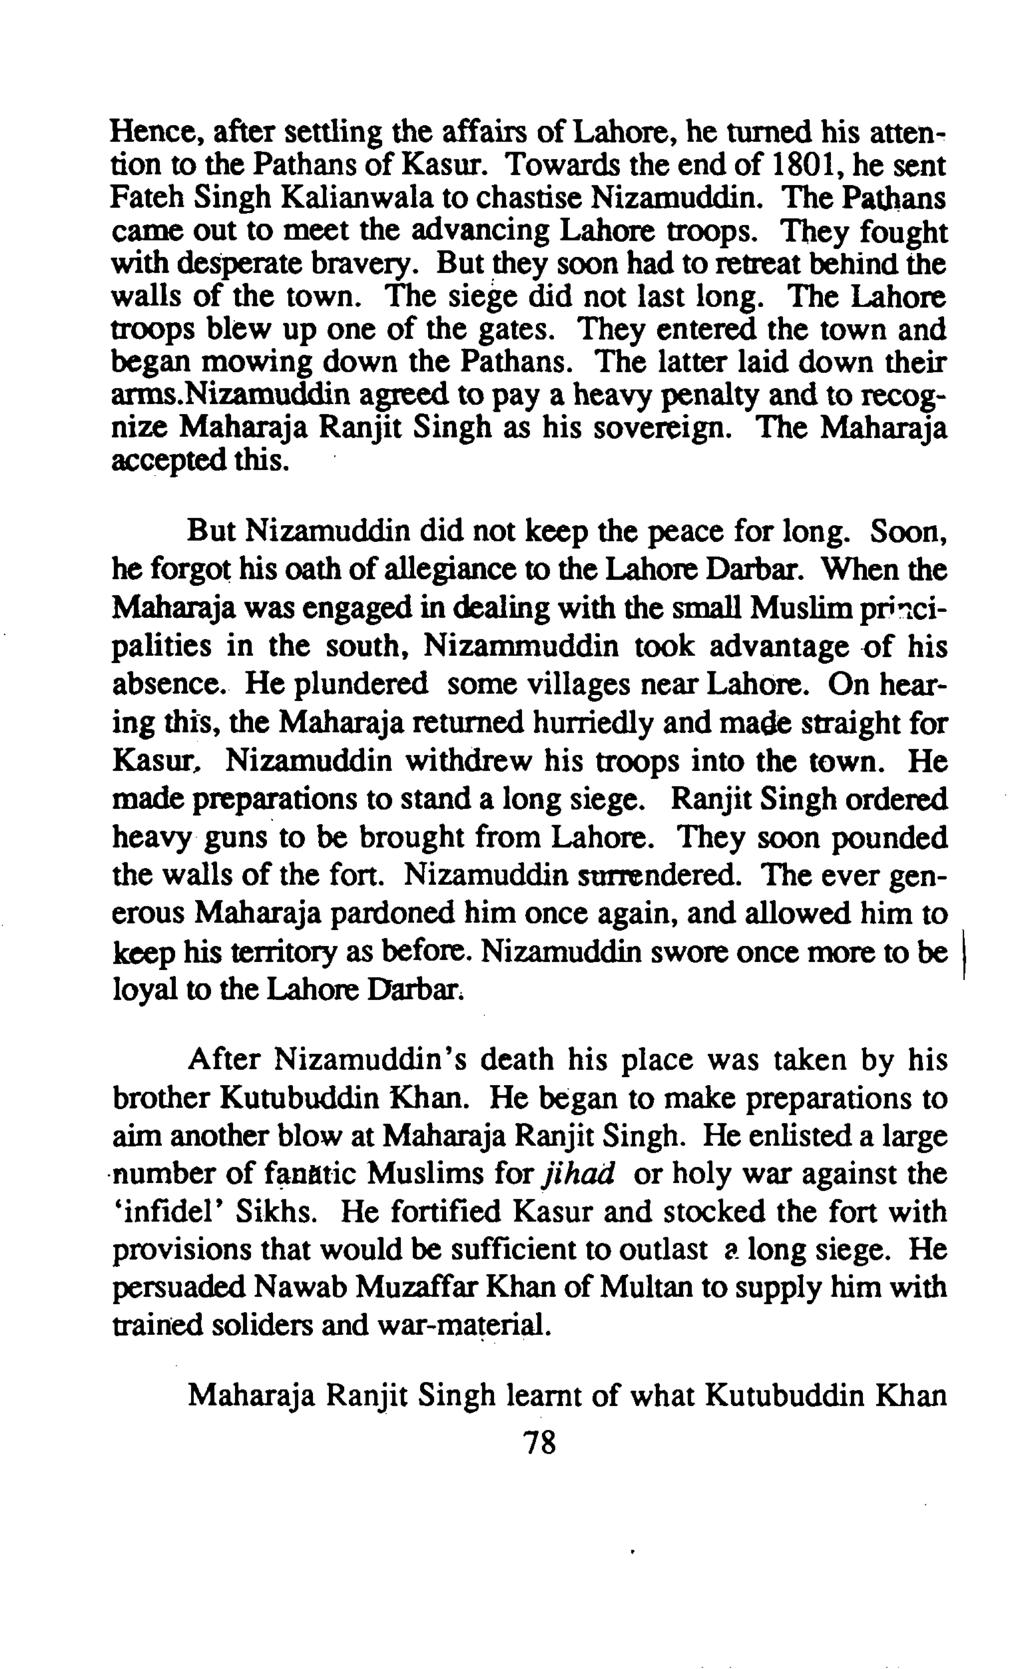 Hence, after settling the affairs oflahore, he turned his attention to the Pathans of Kasur. Towards the end of 1801, he sent Fateh Singh Kalianwala to chastise Nizamuddin.